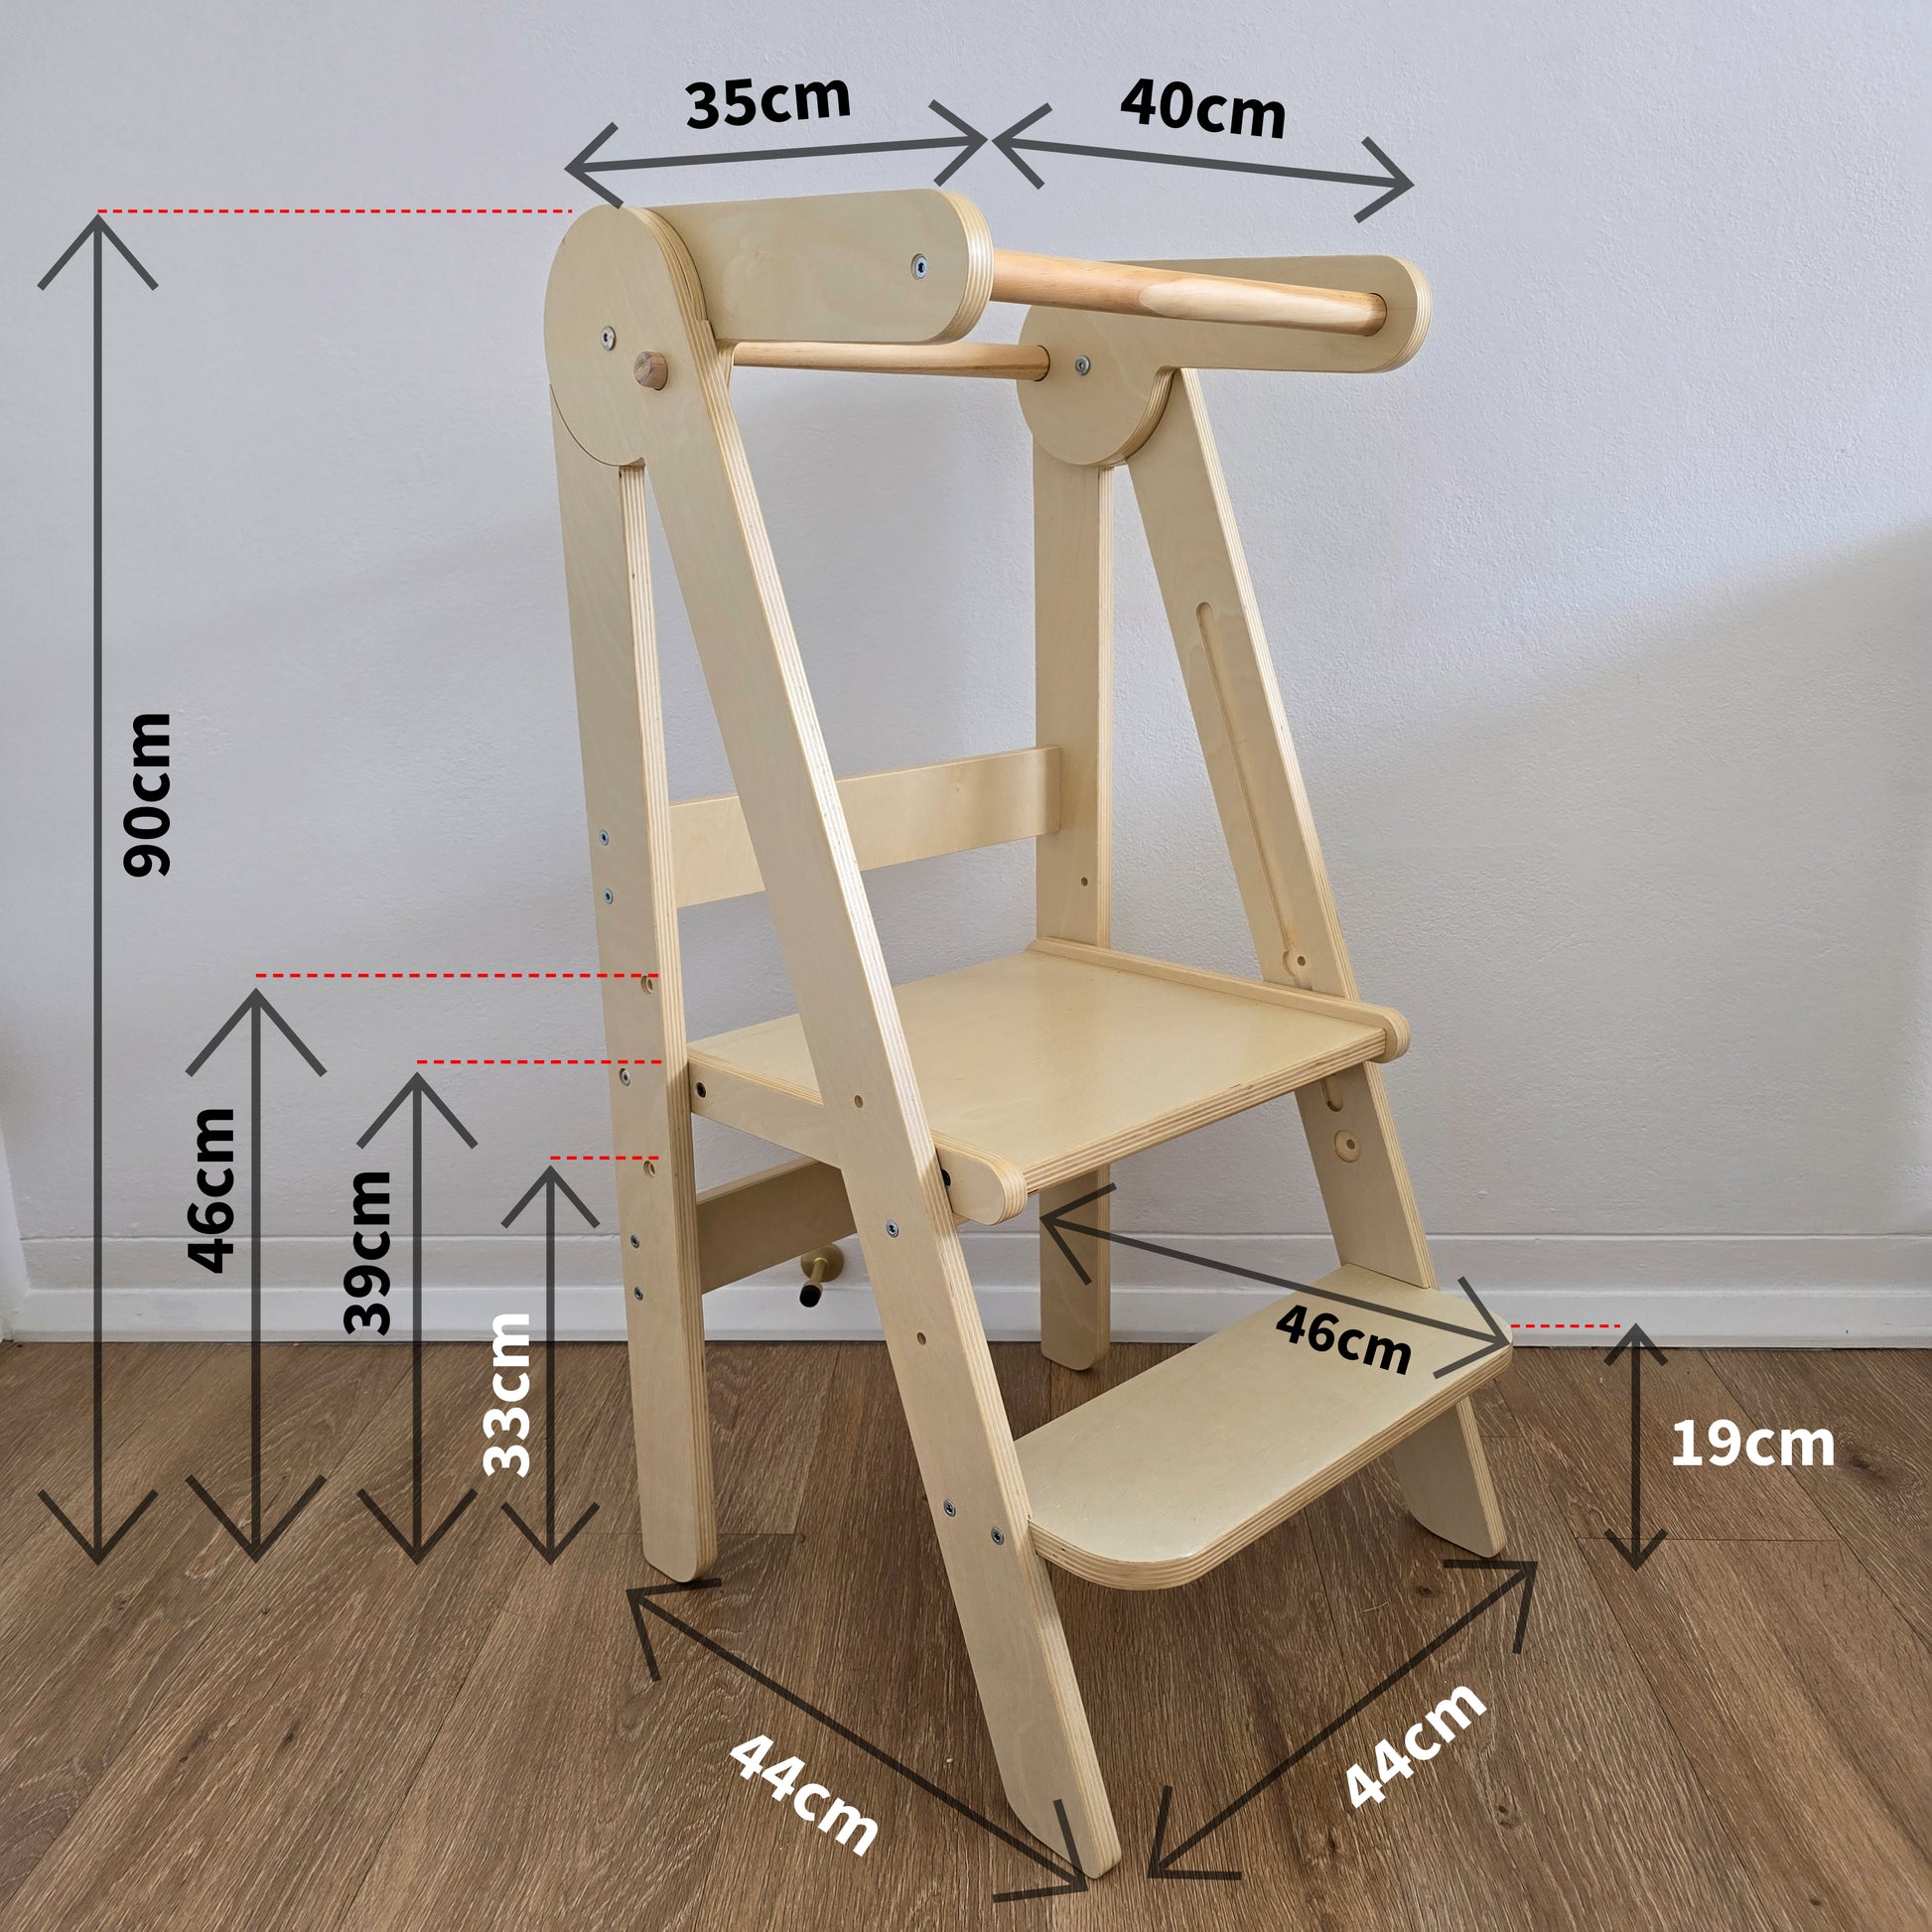 Image displaying all open dimensions of the Four Little Monkeys Natural Adjustable Foldable Learning Tower, showing height, width and depth measurements.